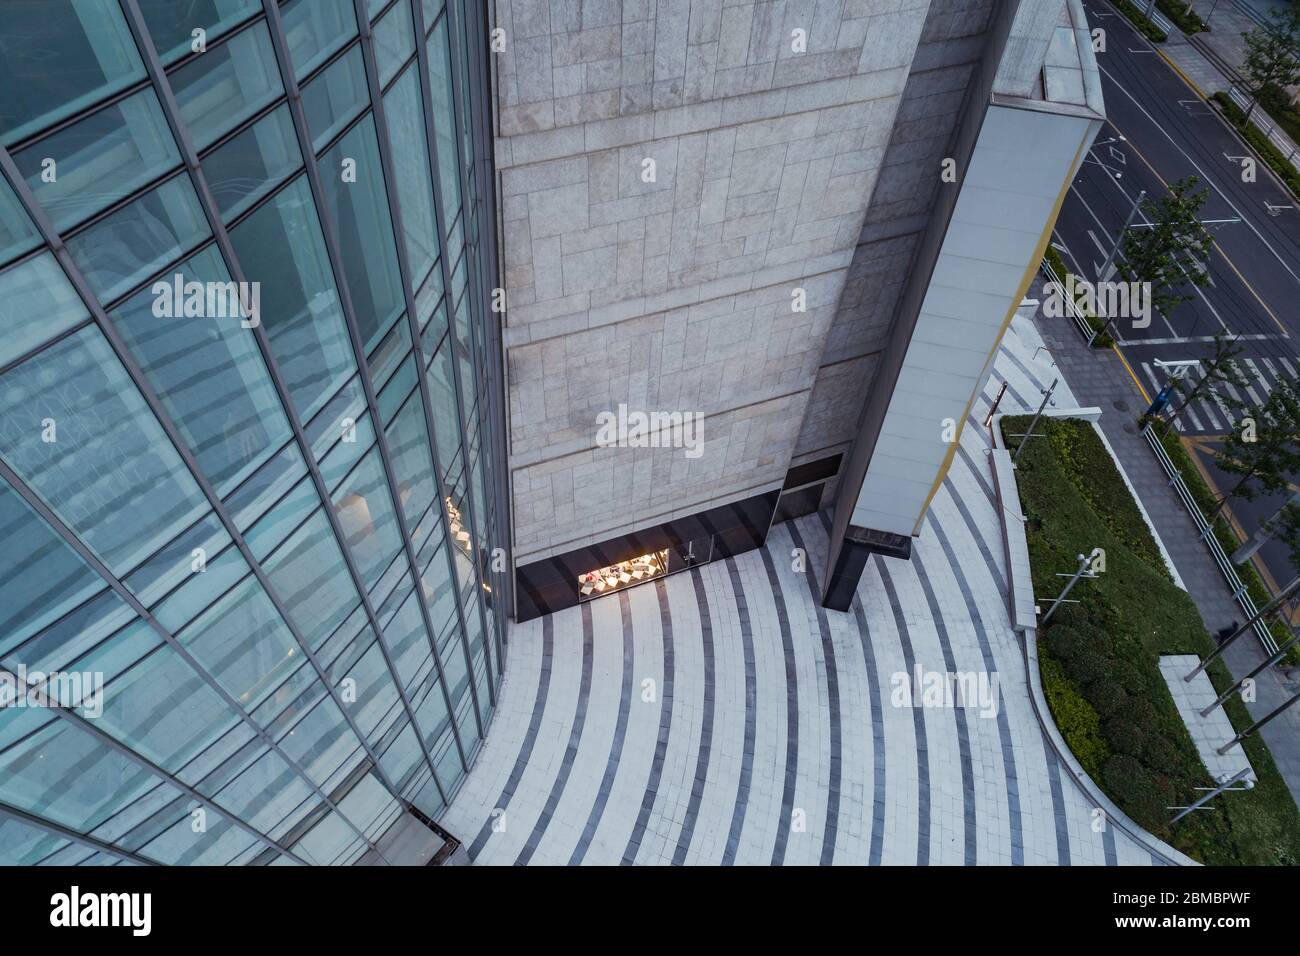 aerial view of entrance ground of modern building Stock Photo